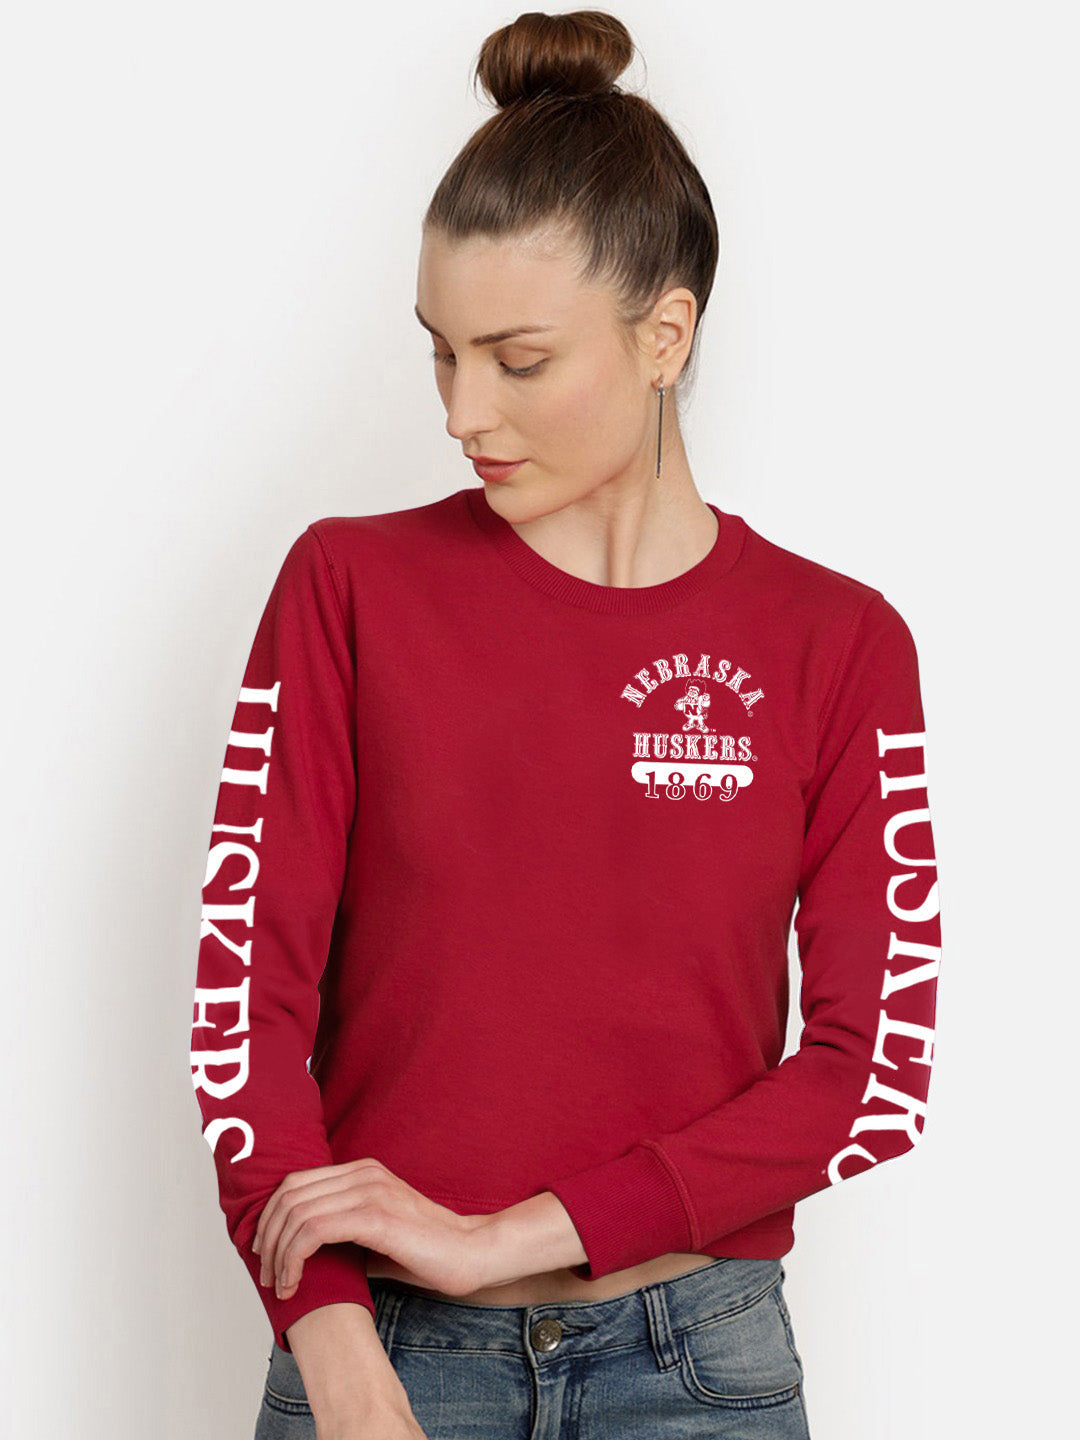 47 Crew Neck Full Sleeve Crop Tee Shirt For Ladies-Red-SP1984